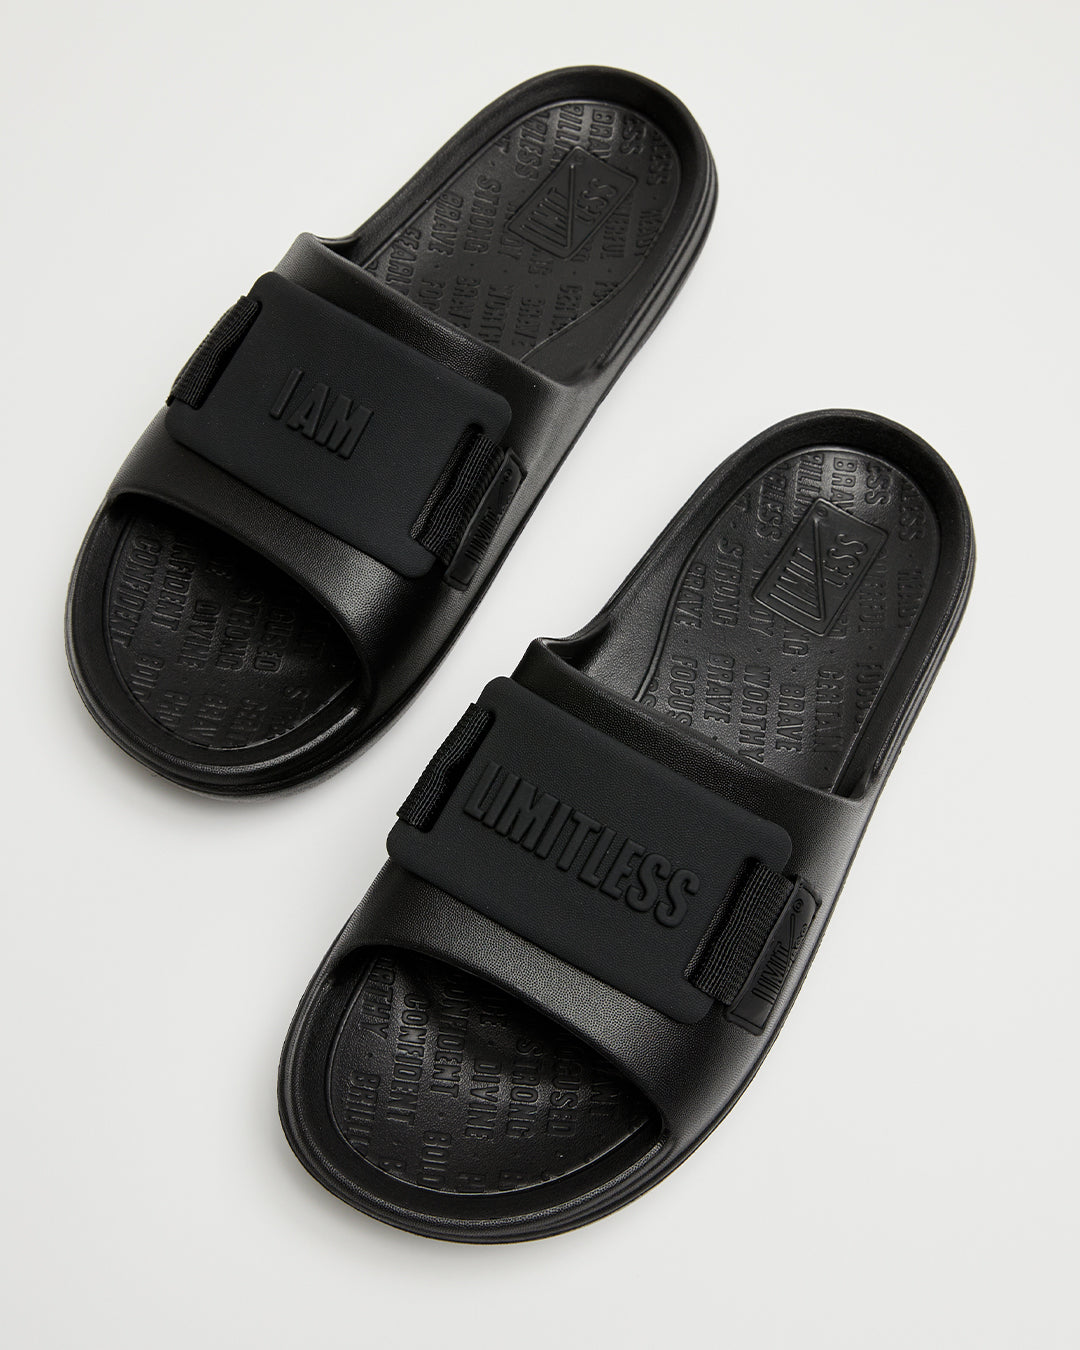 LIMITLESS SLIDES™ WITH ESSENTIAL TIBAH™ QUAD - NEVILLE HIGH SCHOOL EDITION